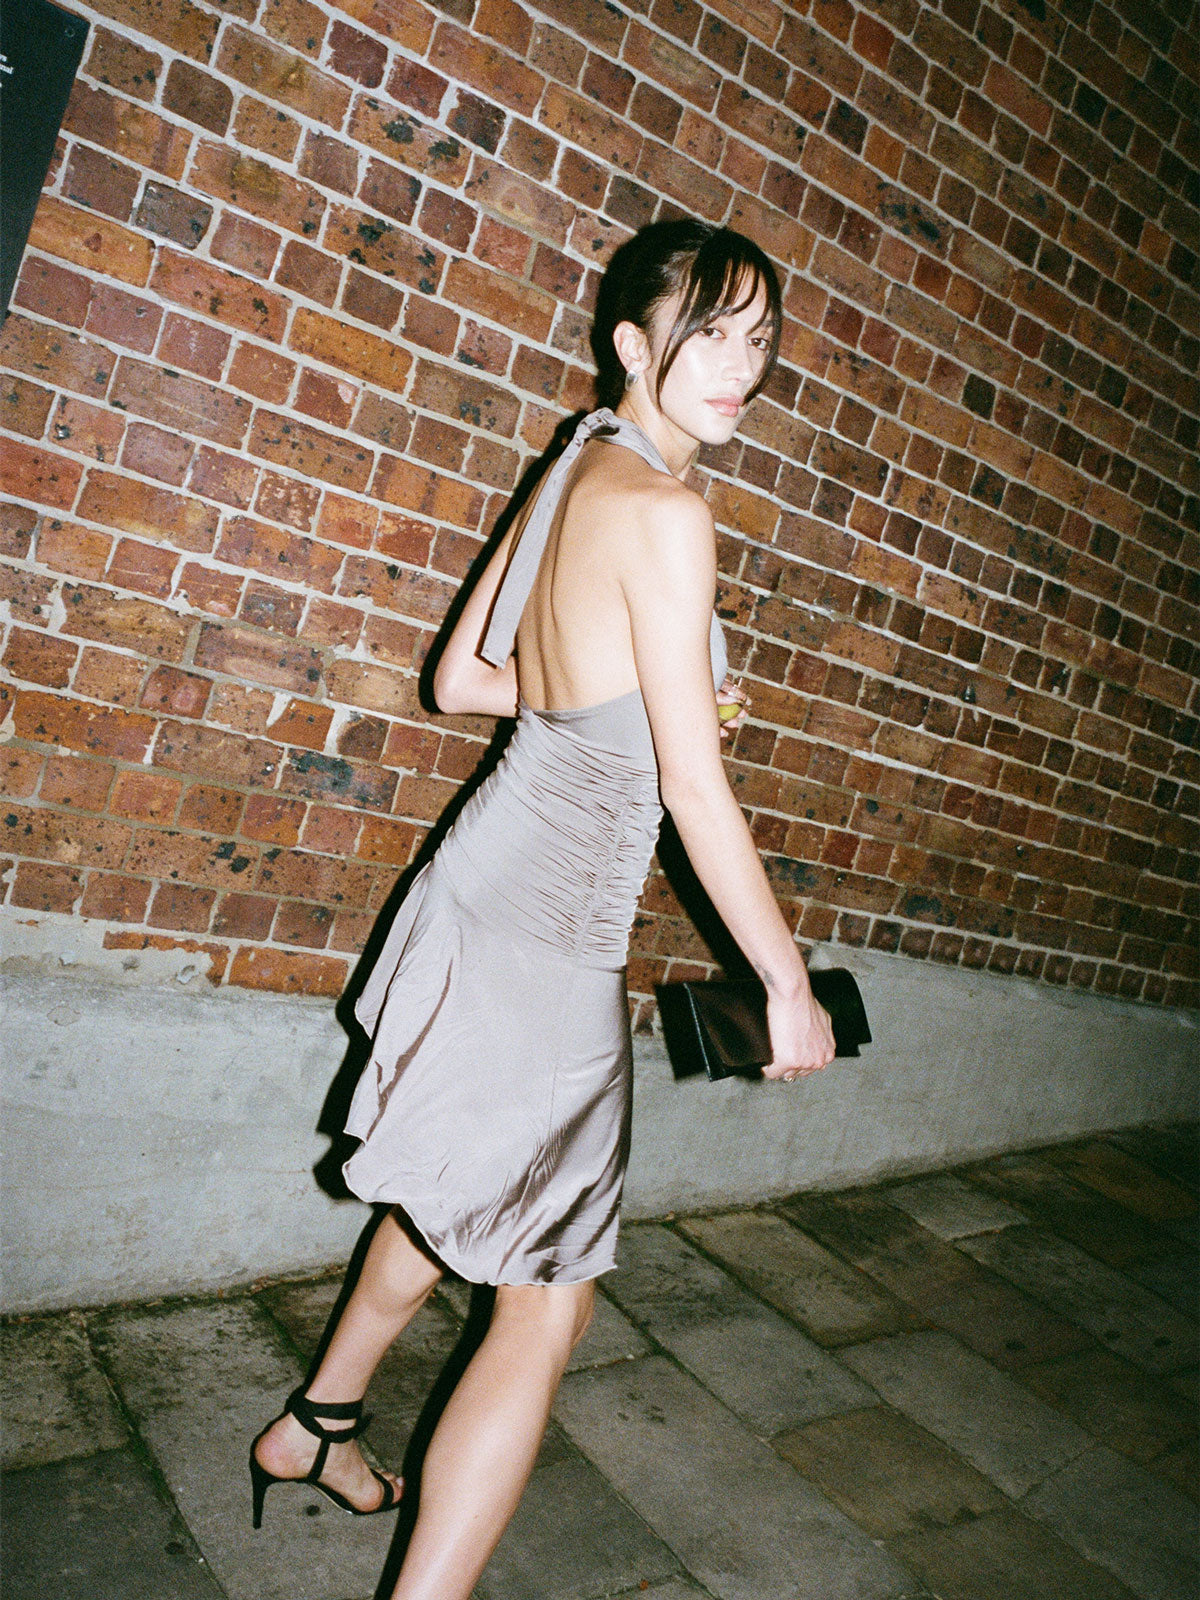 A model walking near a brick wall and cobbled street looking off to the side wearing the Concrete 09 Halter Mini and holding her purse